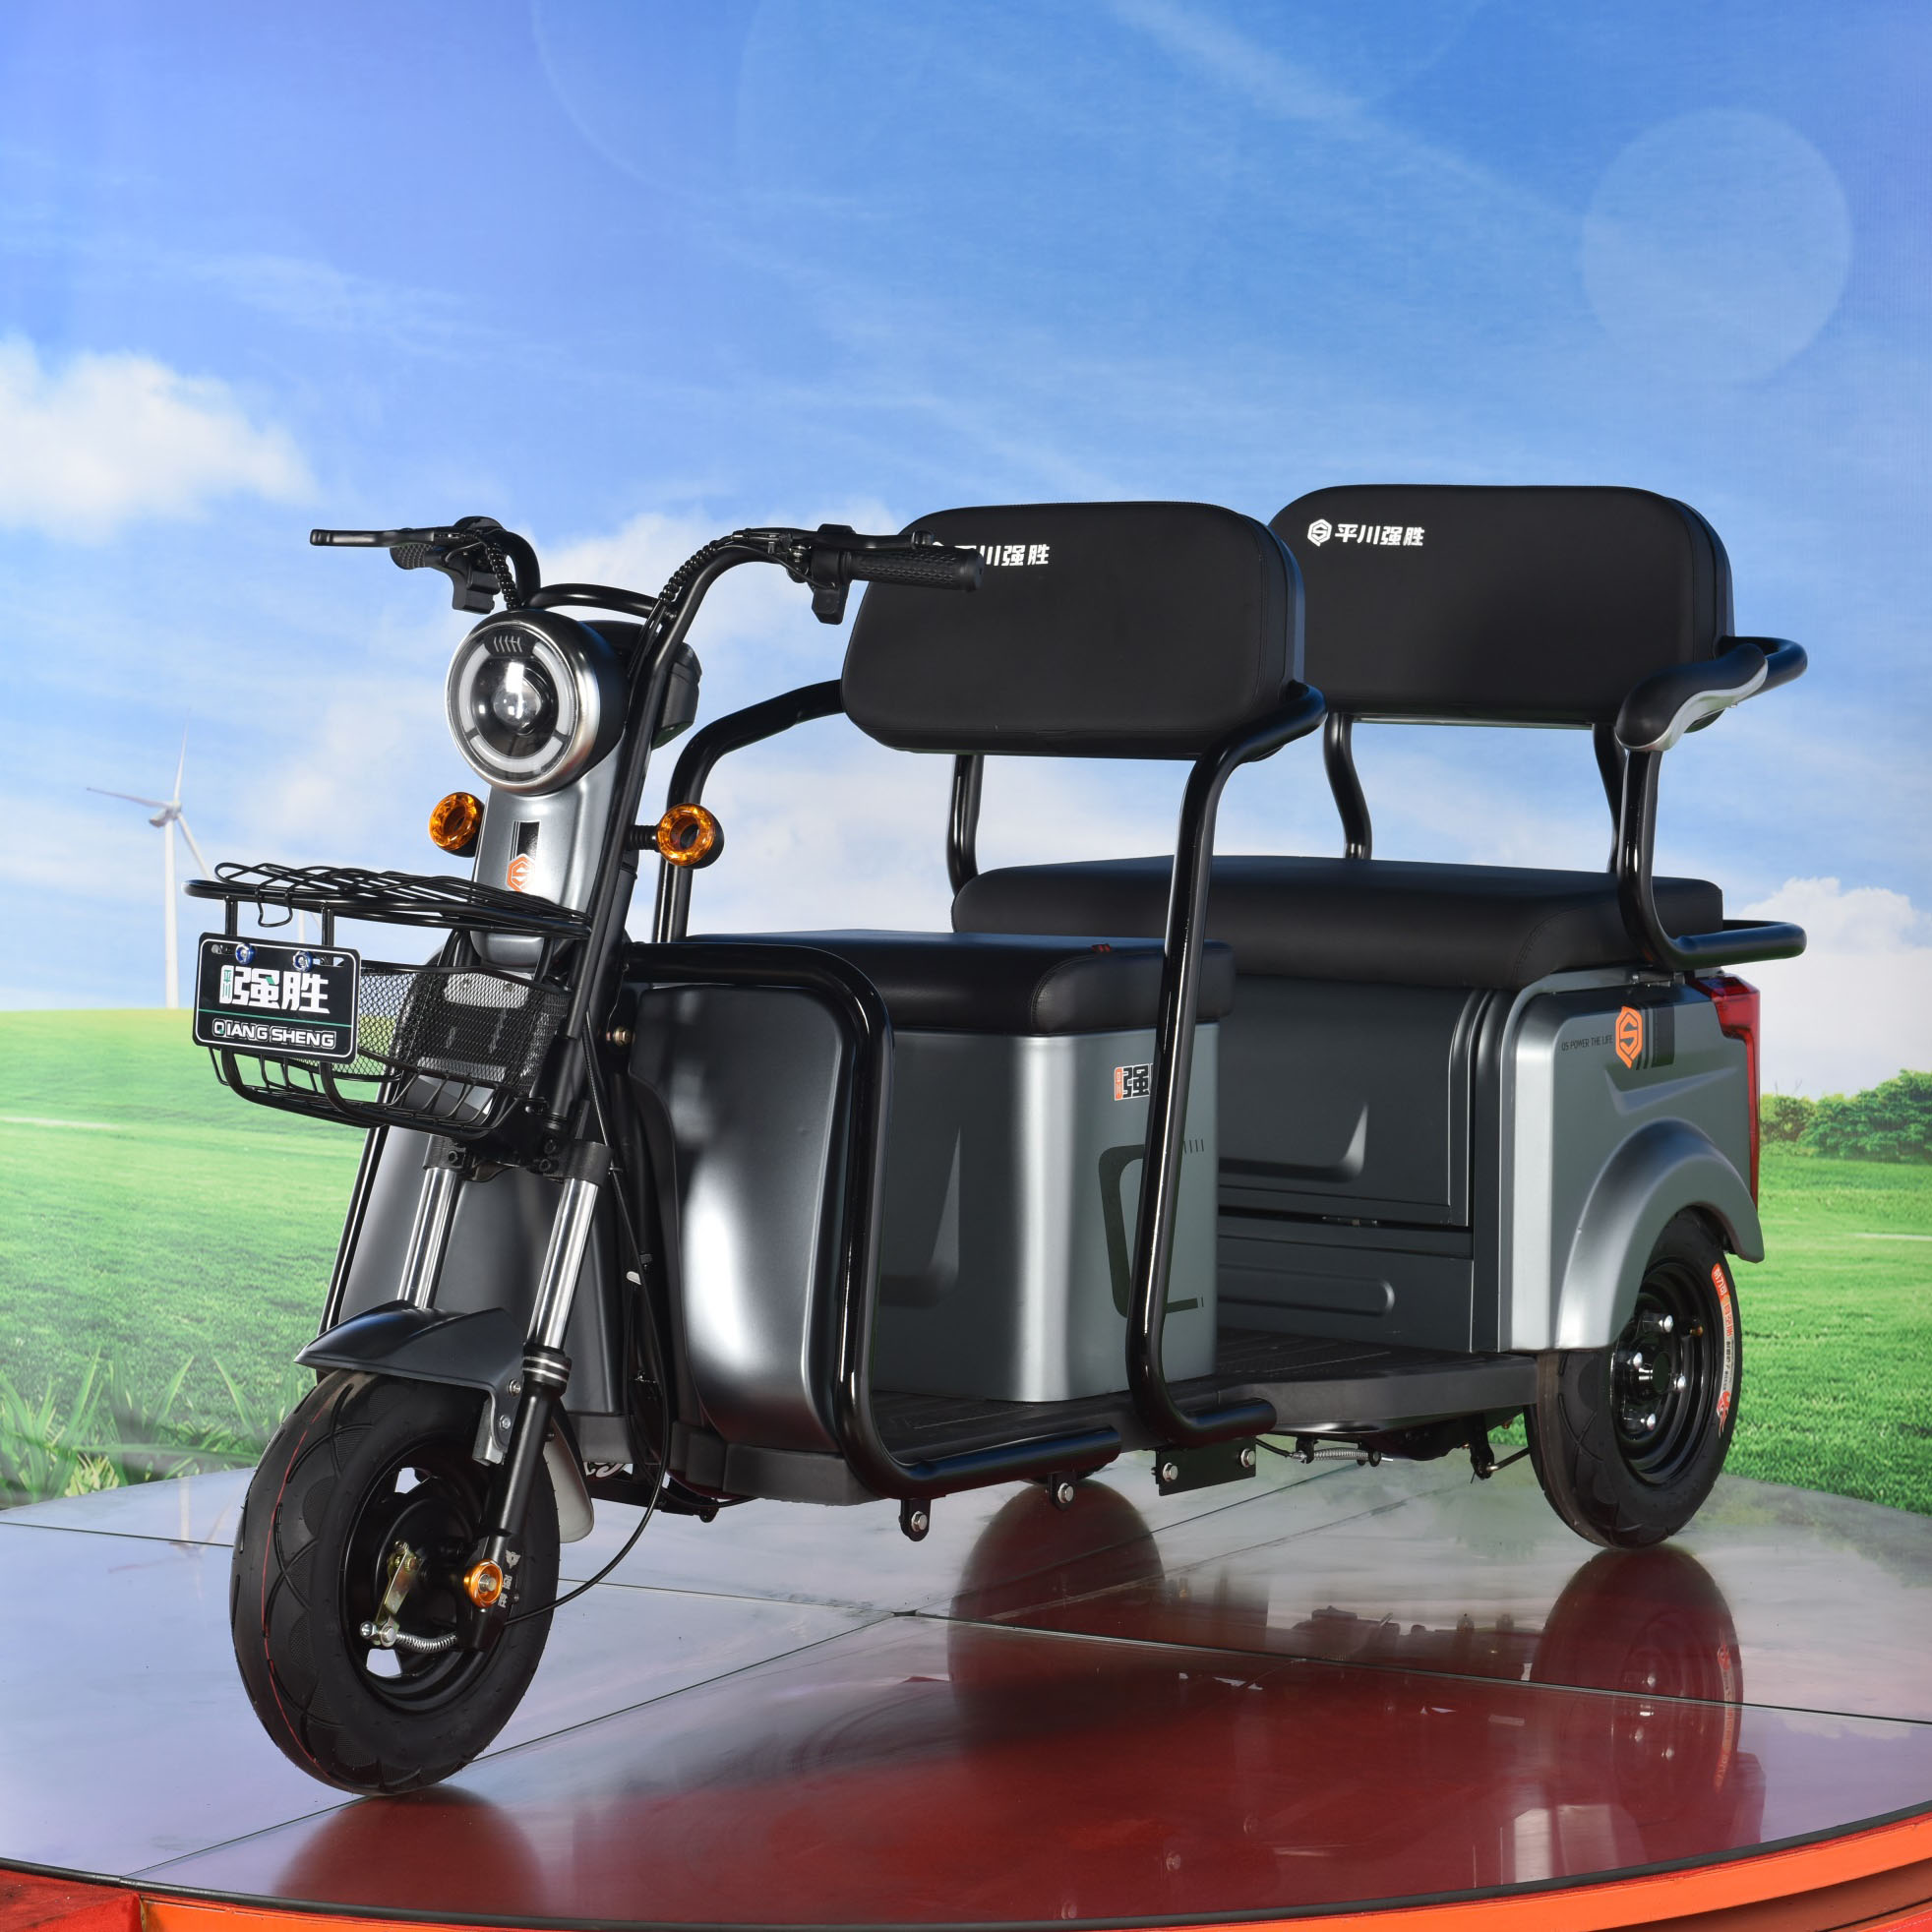 China Wholesale E Rickshaw Company Manufacturers - New Products Wholesale High Quality Electric Car electric leisure tricycle – Qiangsheng